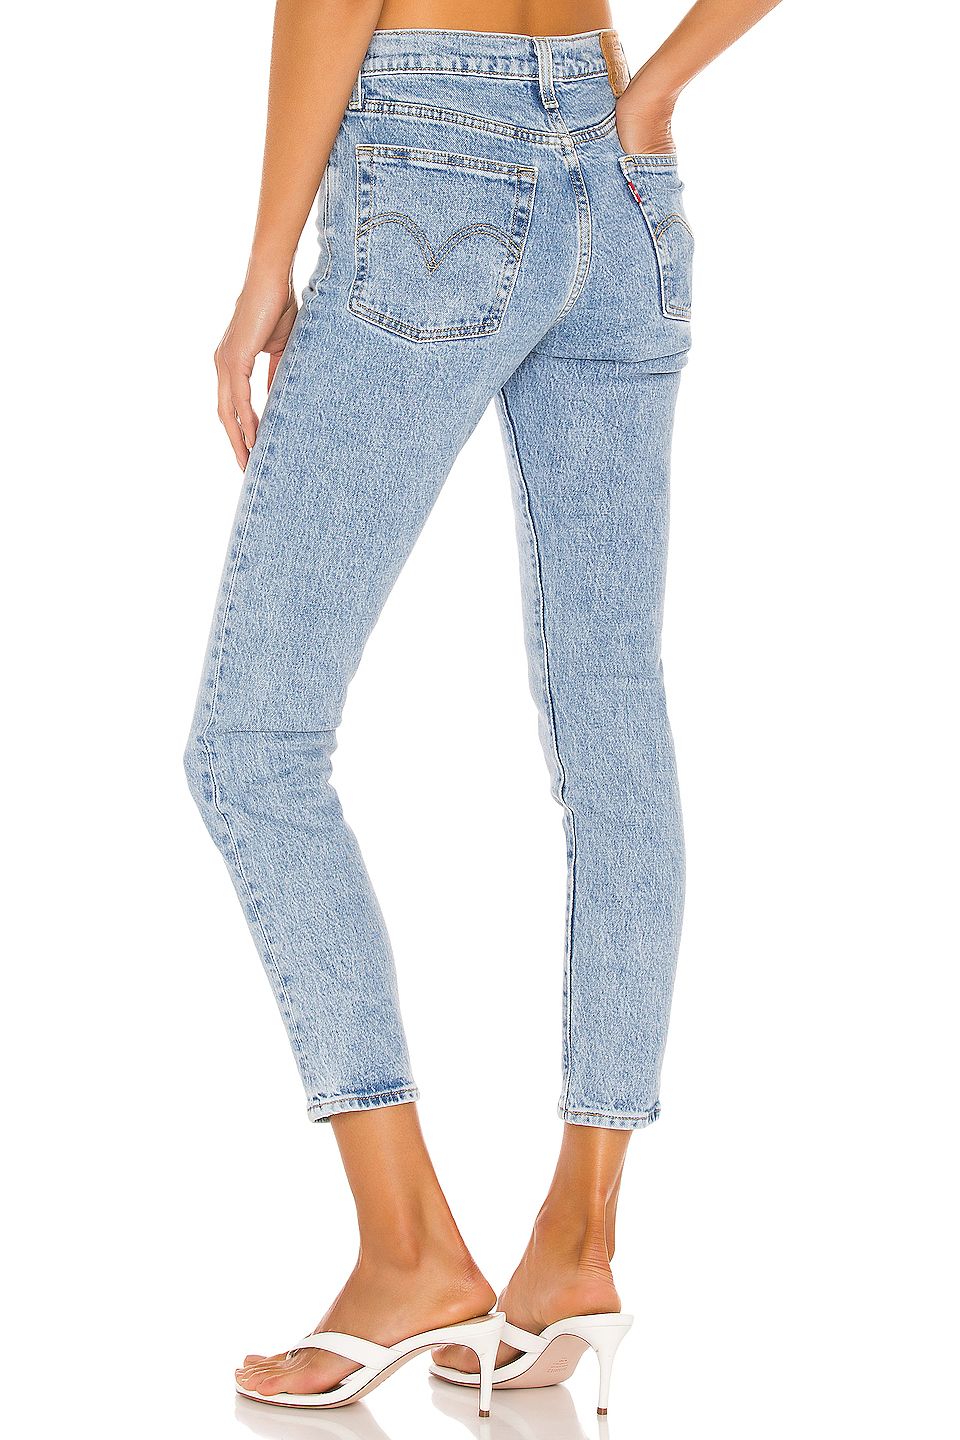 Revolve Wedgie Icon Jeans